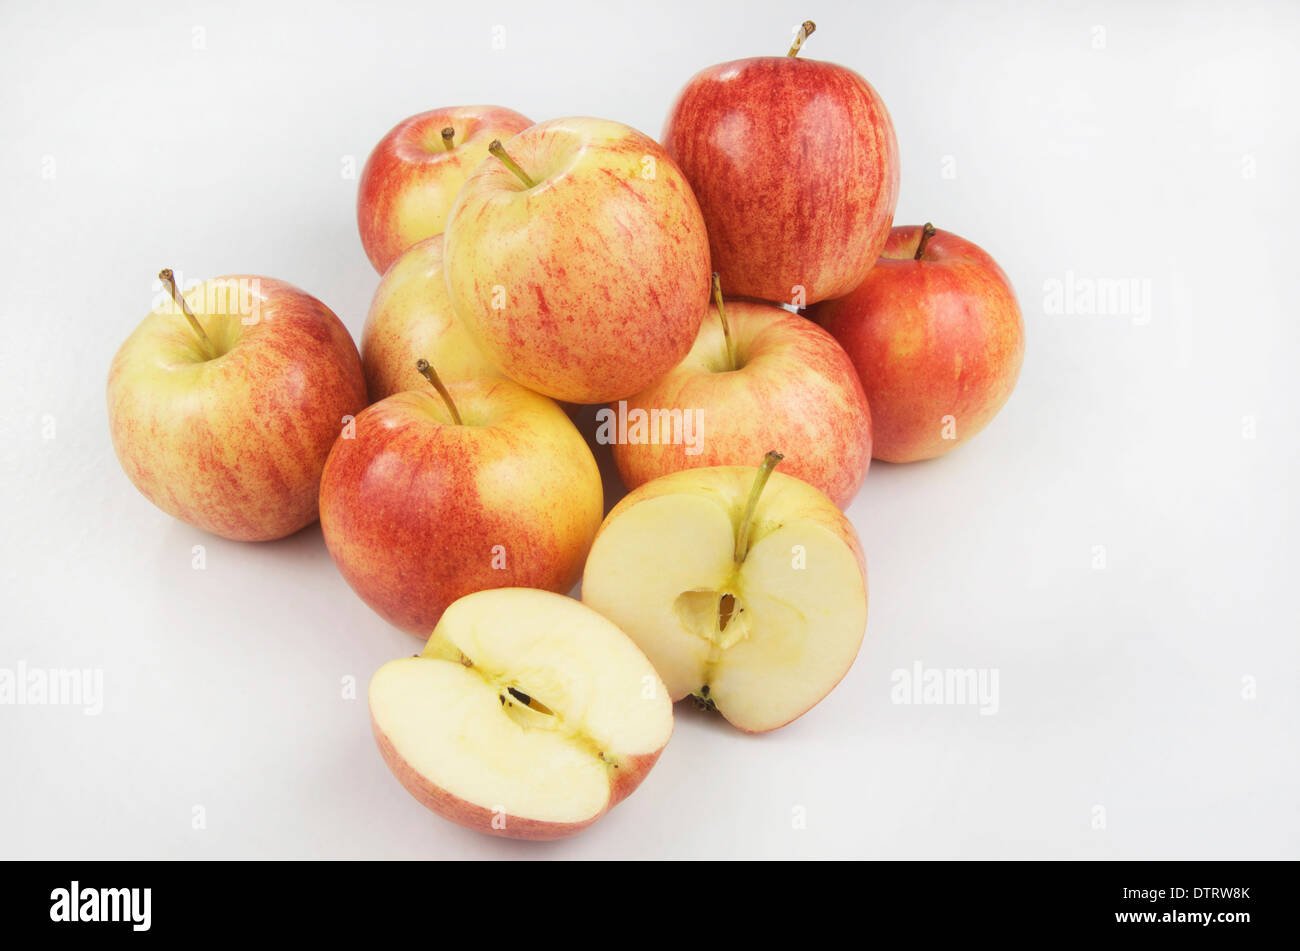 Apples on white background with one cut open Stock Photo